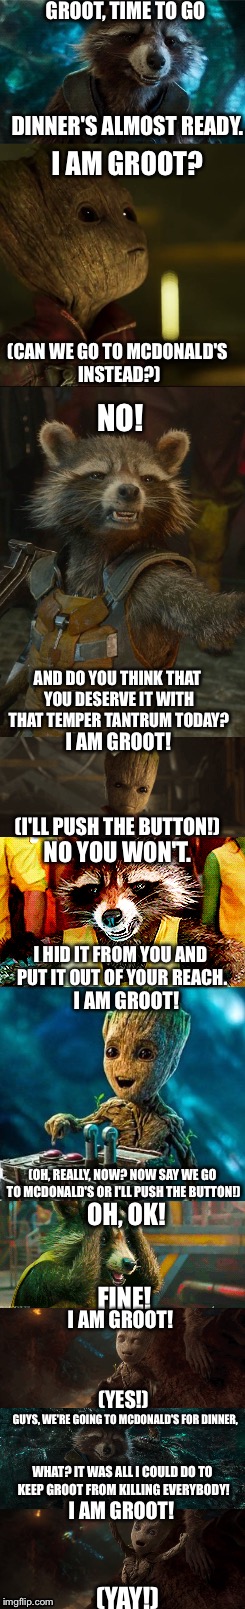 Groot Gets What He Wants | GROOT, TIME TO GO; DINNER'S ALMOST READY. I AM GROOT? (CAN WE GO TO MCDONALD'S INSTEAD?); NO! AND DO YOU THINK THAT YOU DESERVE IT WITH THAT TEMPER TANTRUM TODAY? I AM GROOT! (I'LL PUSH THE BUTTON!); NO YOU WON'T. I HID IT FROM YOU AND PUT IT OUT OF YOUR REACH. I AM GROOT! (OH, REALLY, NOW? NOW SAY WE GO TO MCDONALD'S OR I'LL PUSH THE BUTTON!); OH, OK! FINE! I AM GROOT! (YES!); GUYS, WE'RE GOING TO MCDONALD'S FOR DINNER, WHAT? IT WAS ALL I COULD DO TO KEEP GROOT FROM KILLING EVERYBODY! I AM GROOT! (YAY!) | image tagged in groot,rocket raccoon,gotg2,death button,mcdonalds | made w/ Imgflip meme maker